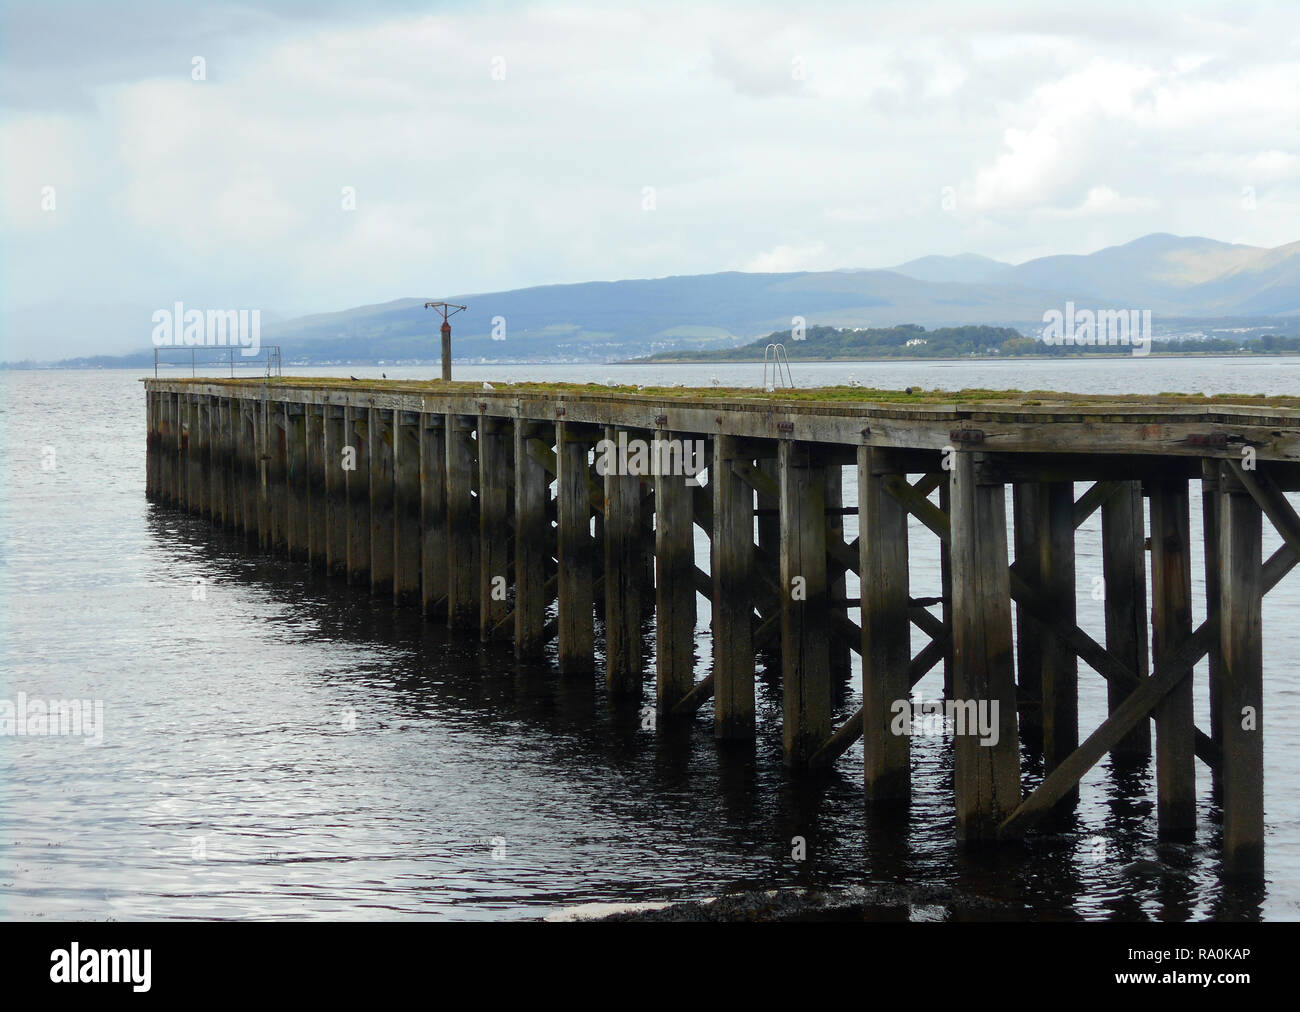 A lonely, forlorn and abandoned pier juts out into the Firth of Clyde near the small Clyde coast town of Port Glasgow in Scotland. Alan Wylie/ALAMY © Stock Photo